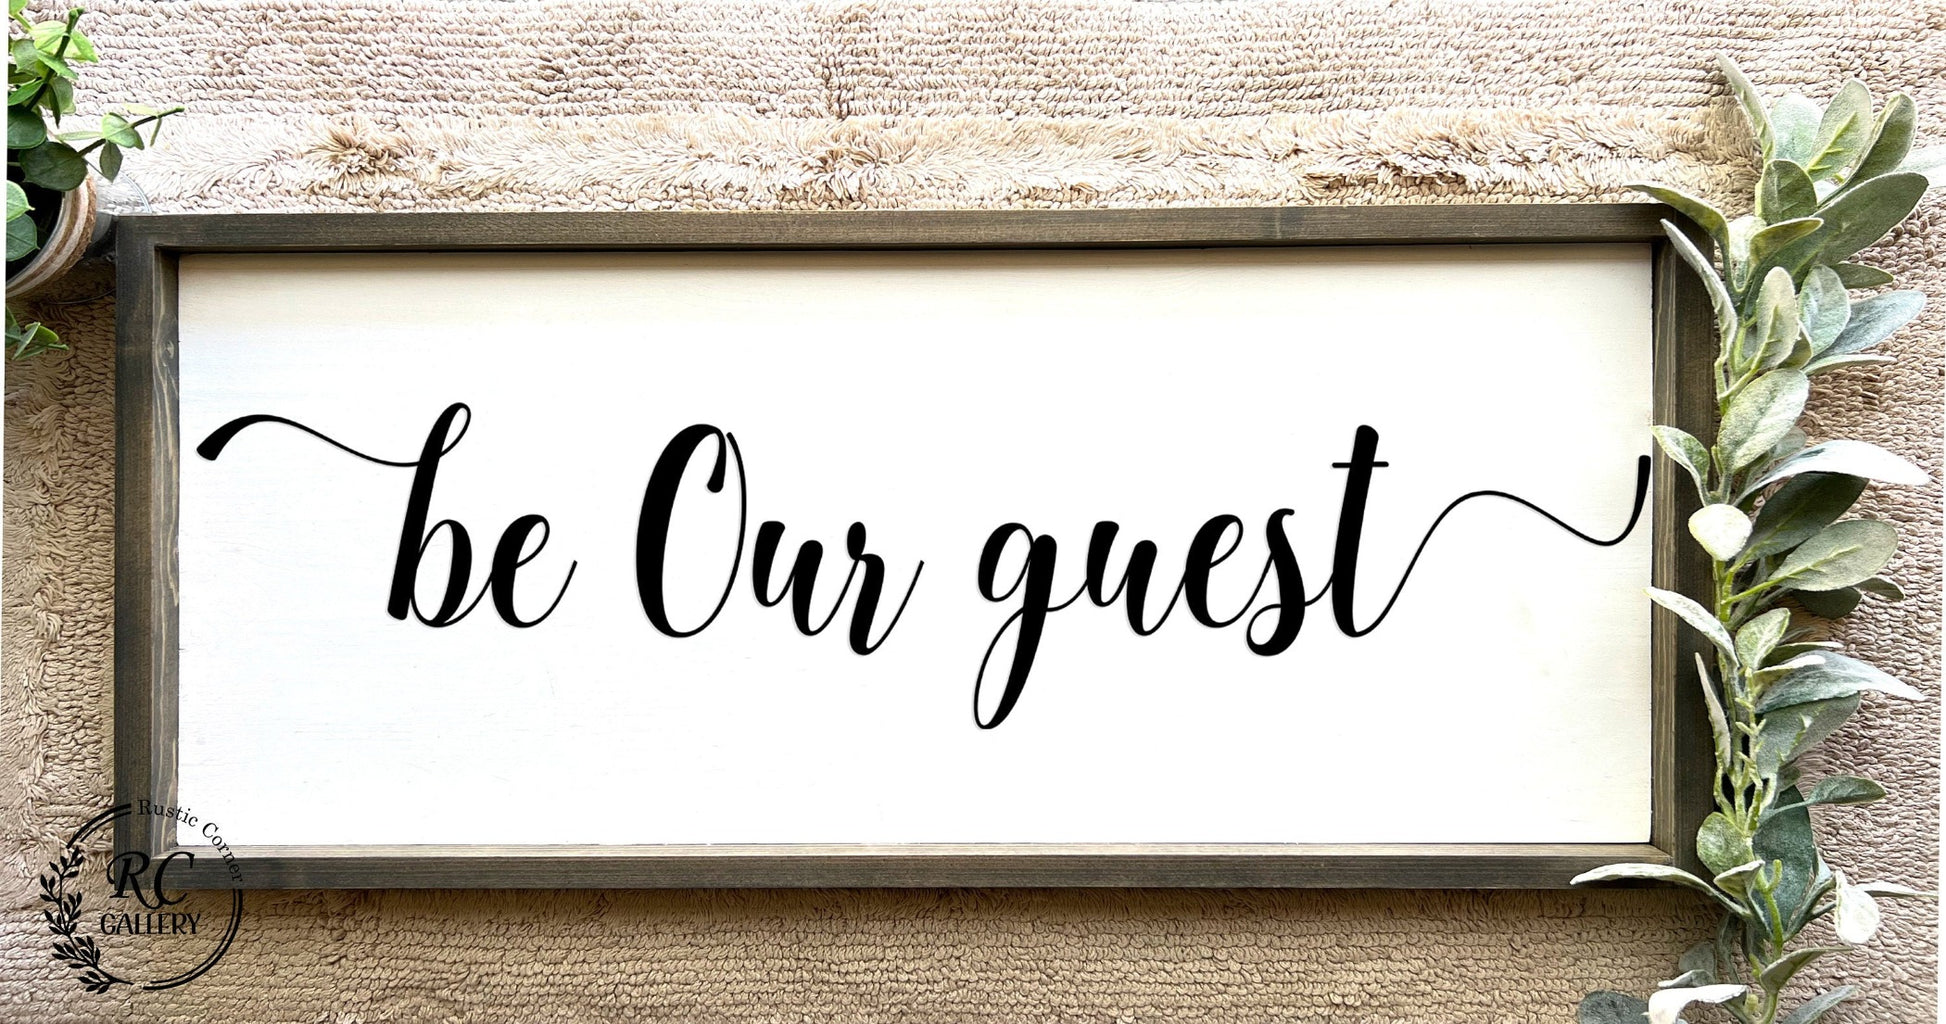 be our guest,  framed wood sign, farmhouse wood sign , guest bedroom decor , bedroom wall decor , farmhouse bedroom